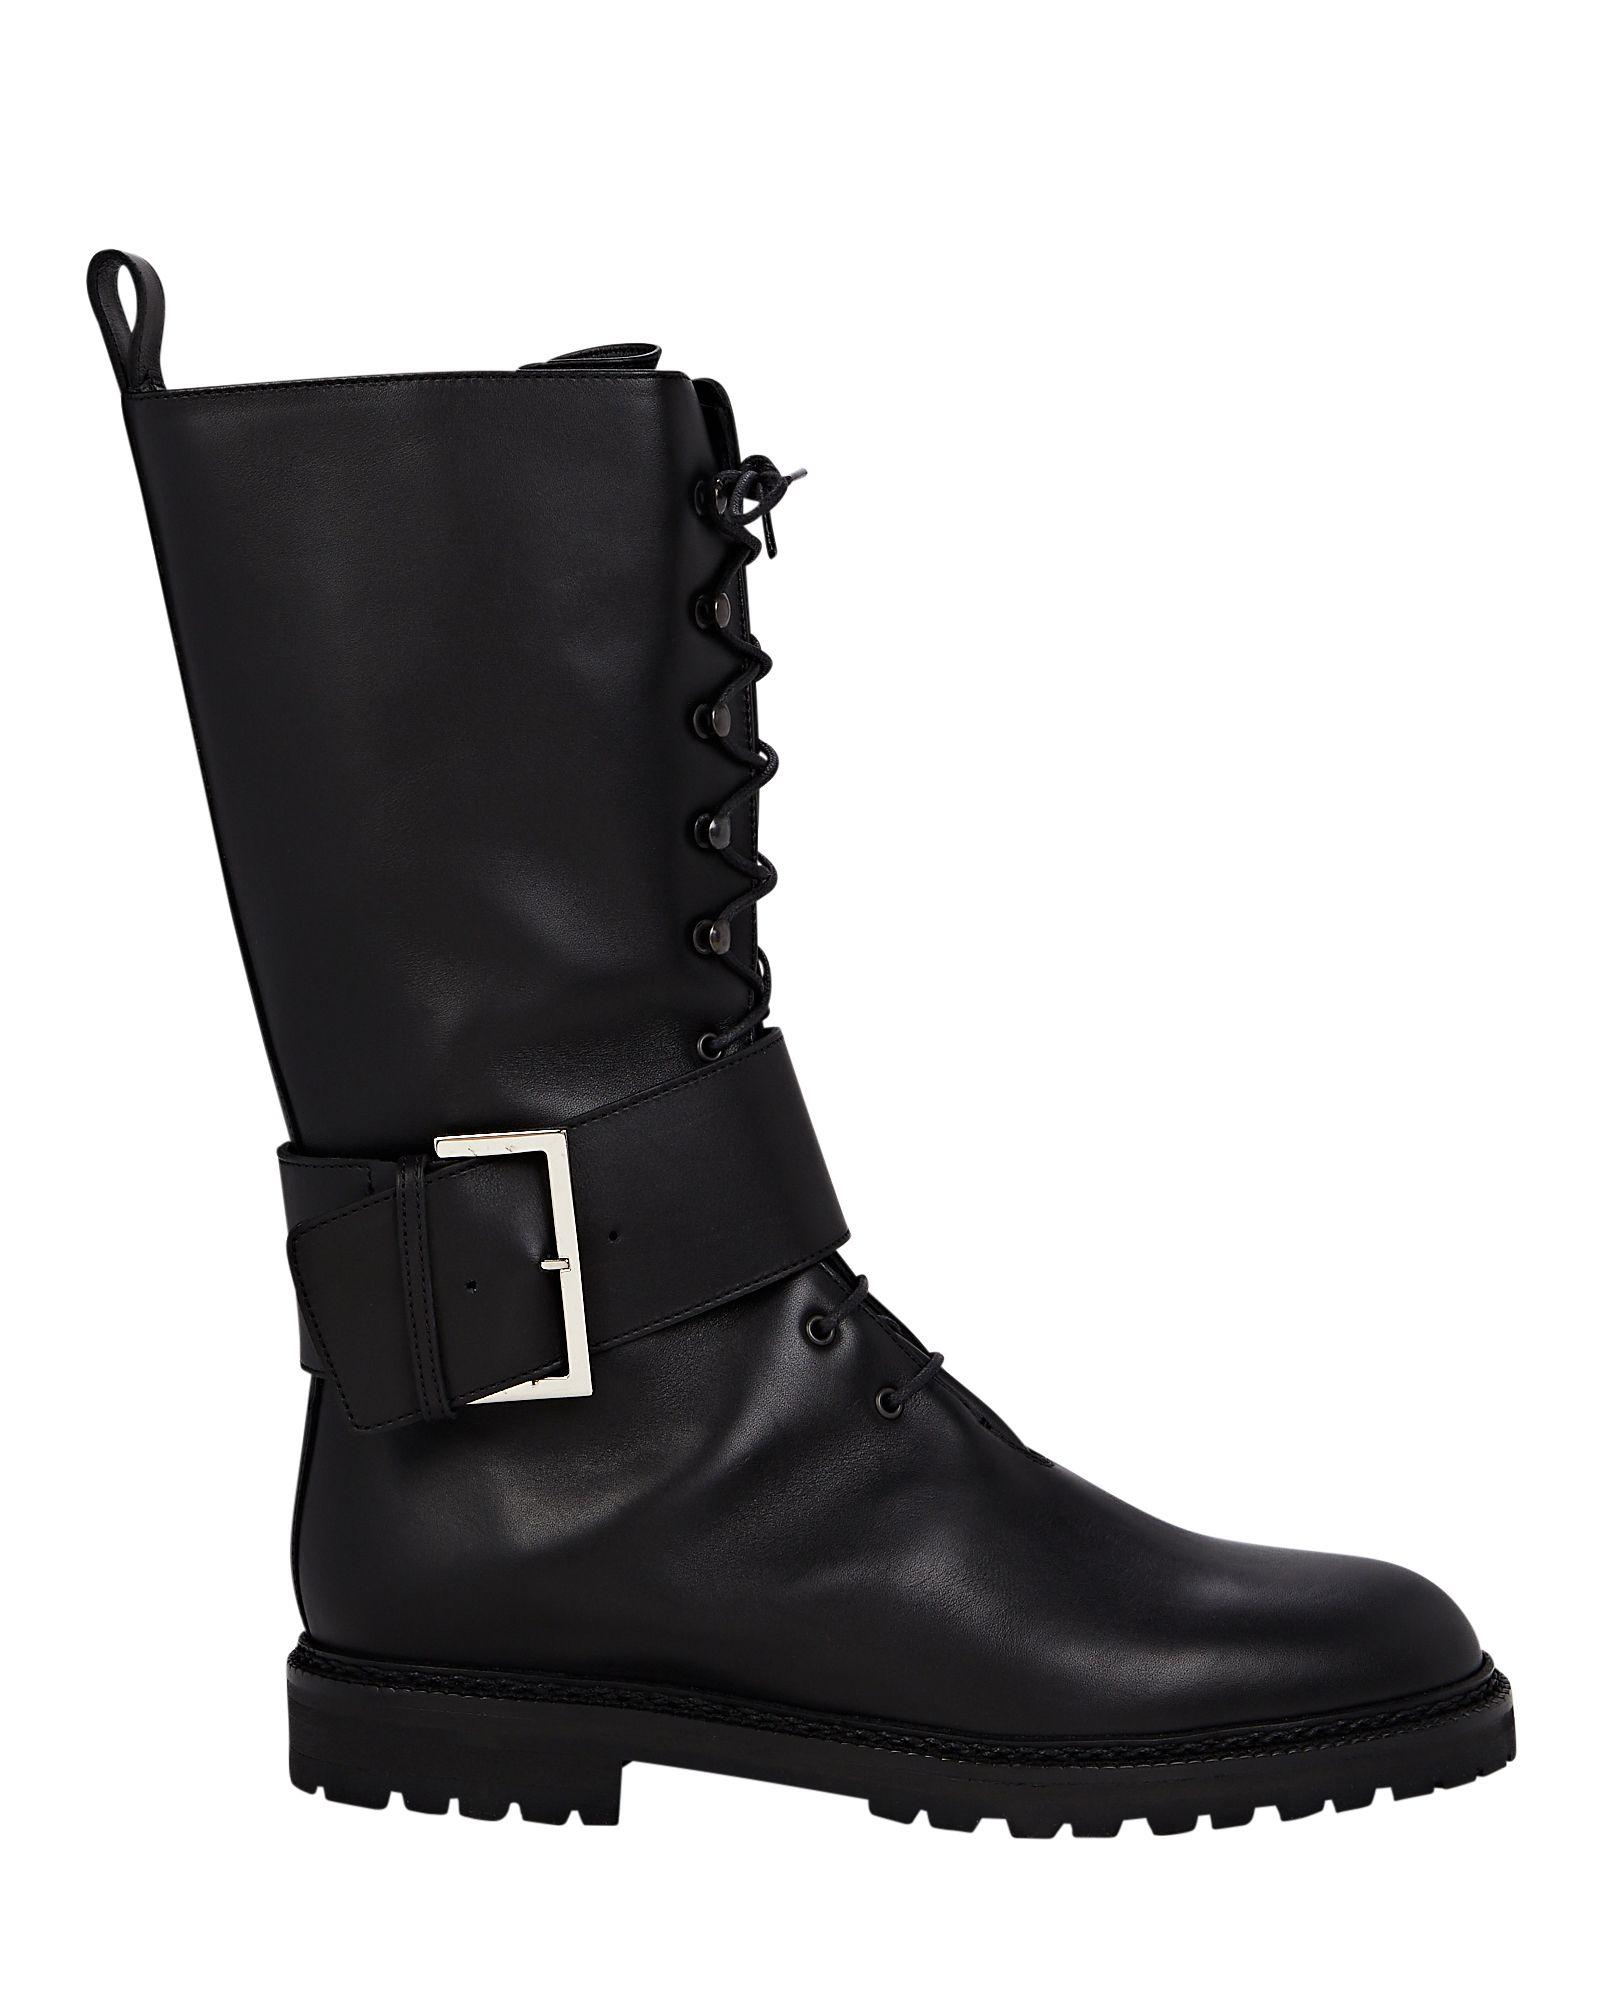 Manolo Blahnik Checkov Leather Combat Boots in Black | Lyst